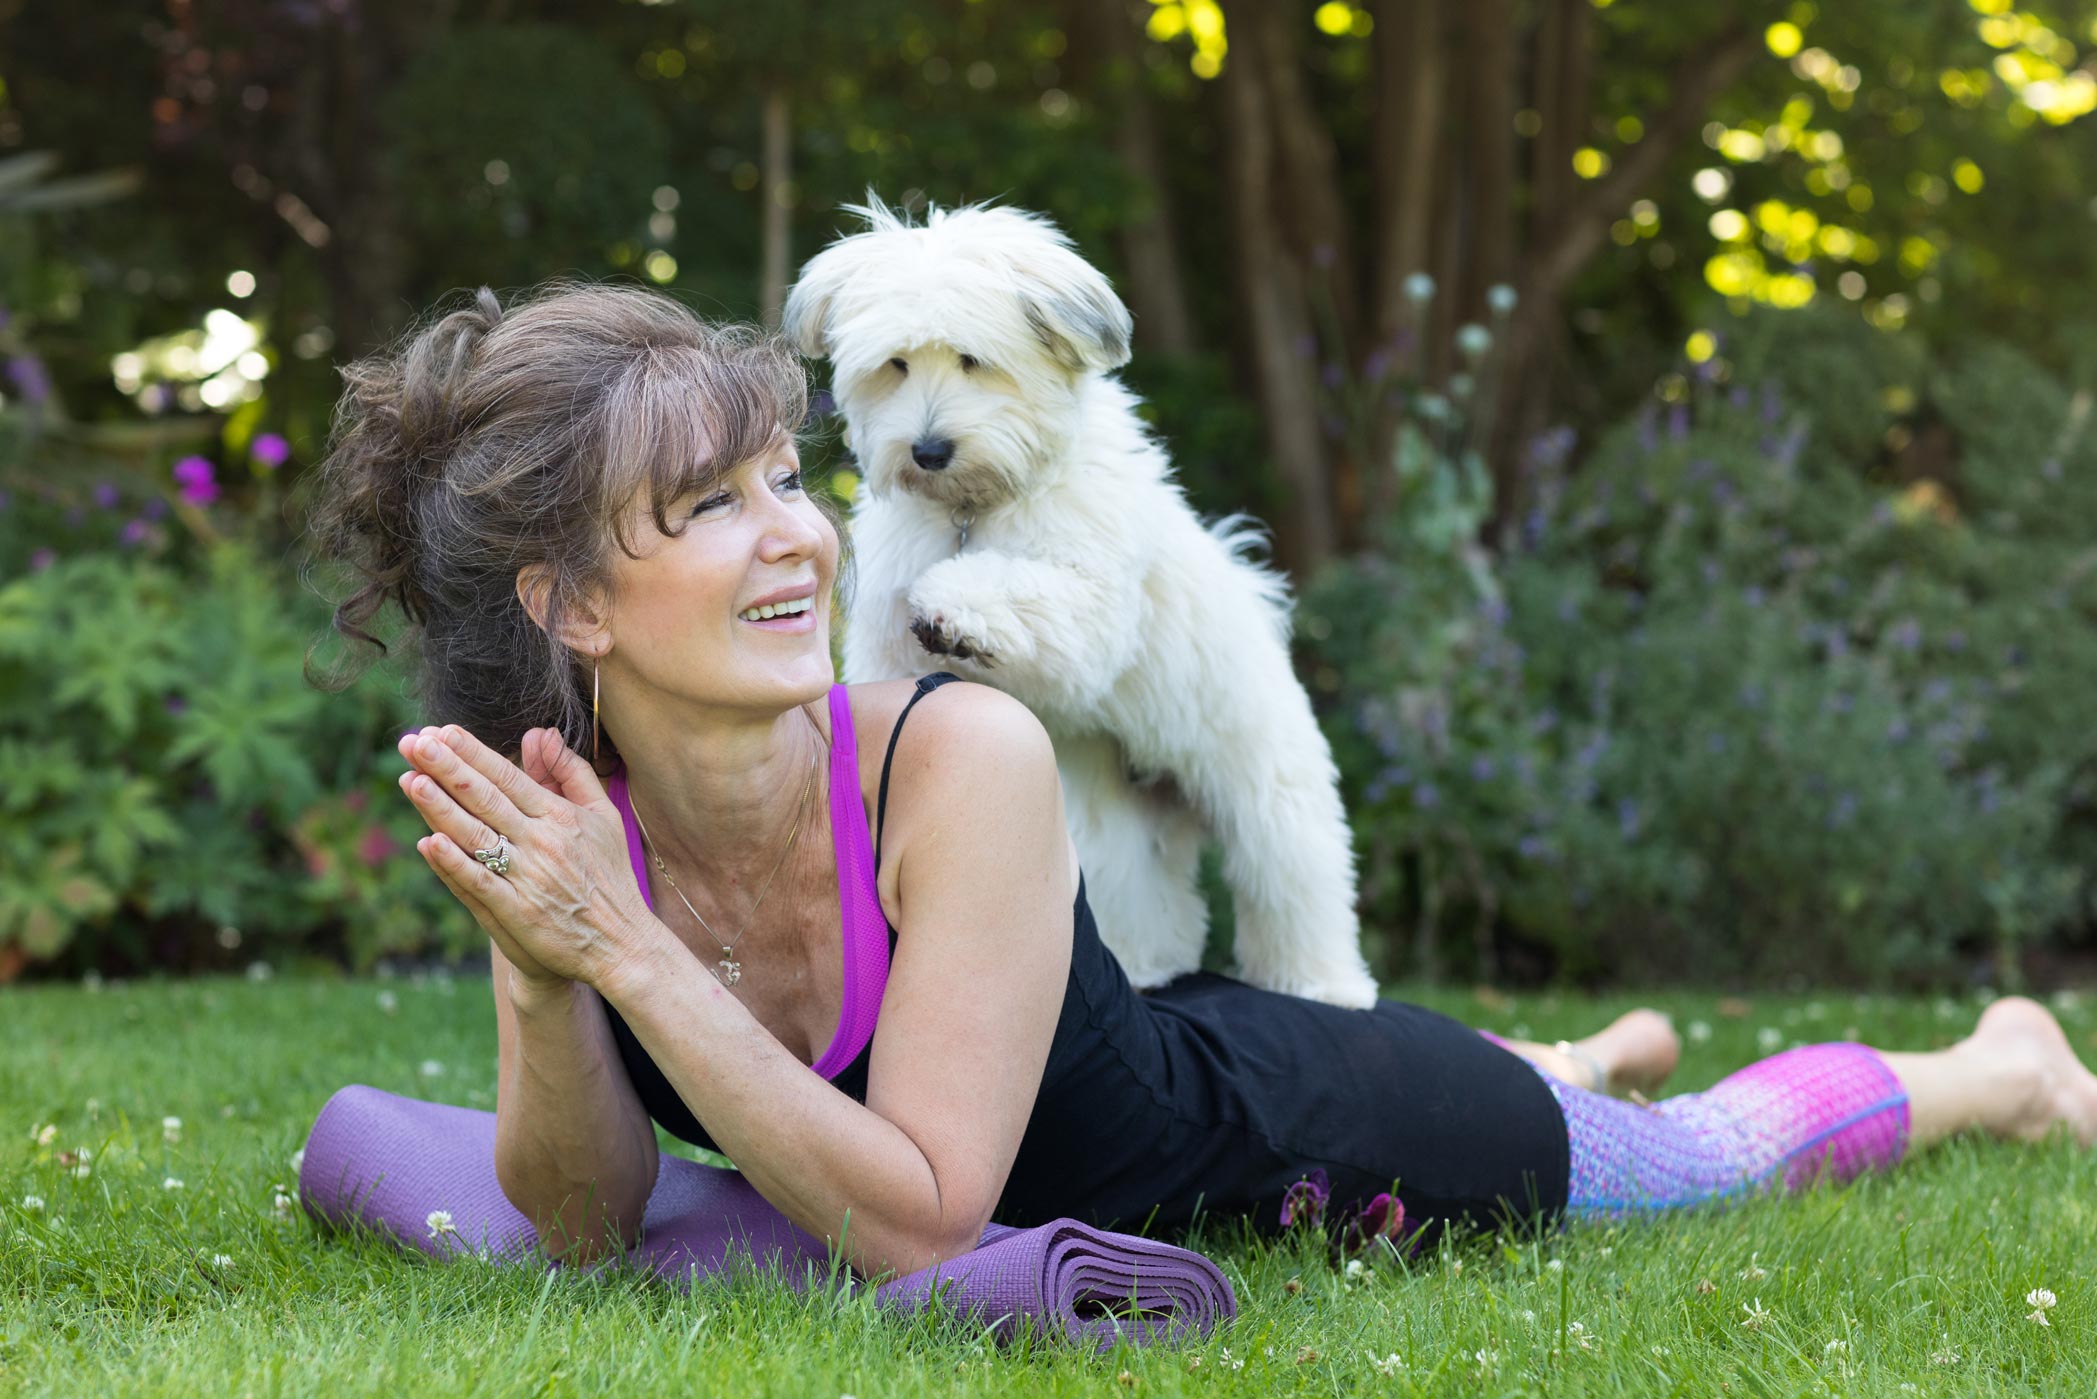 A dog climbs on the back of a yoga teacher as she lies on the mat during her practice at her health & fitness personal branding photography shoot in Croydon, London